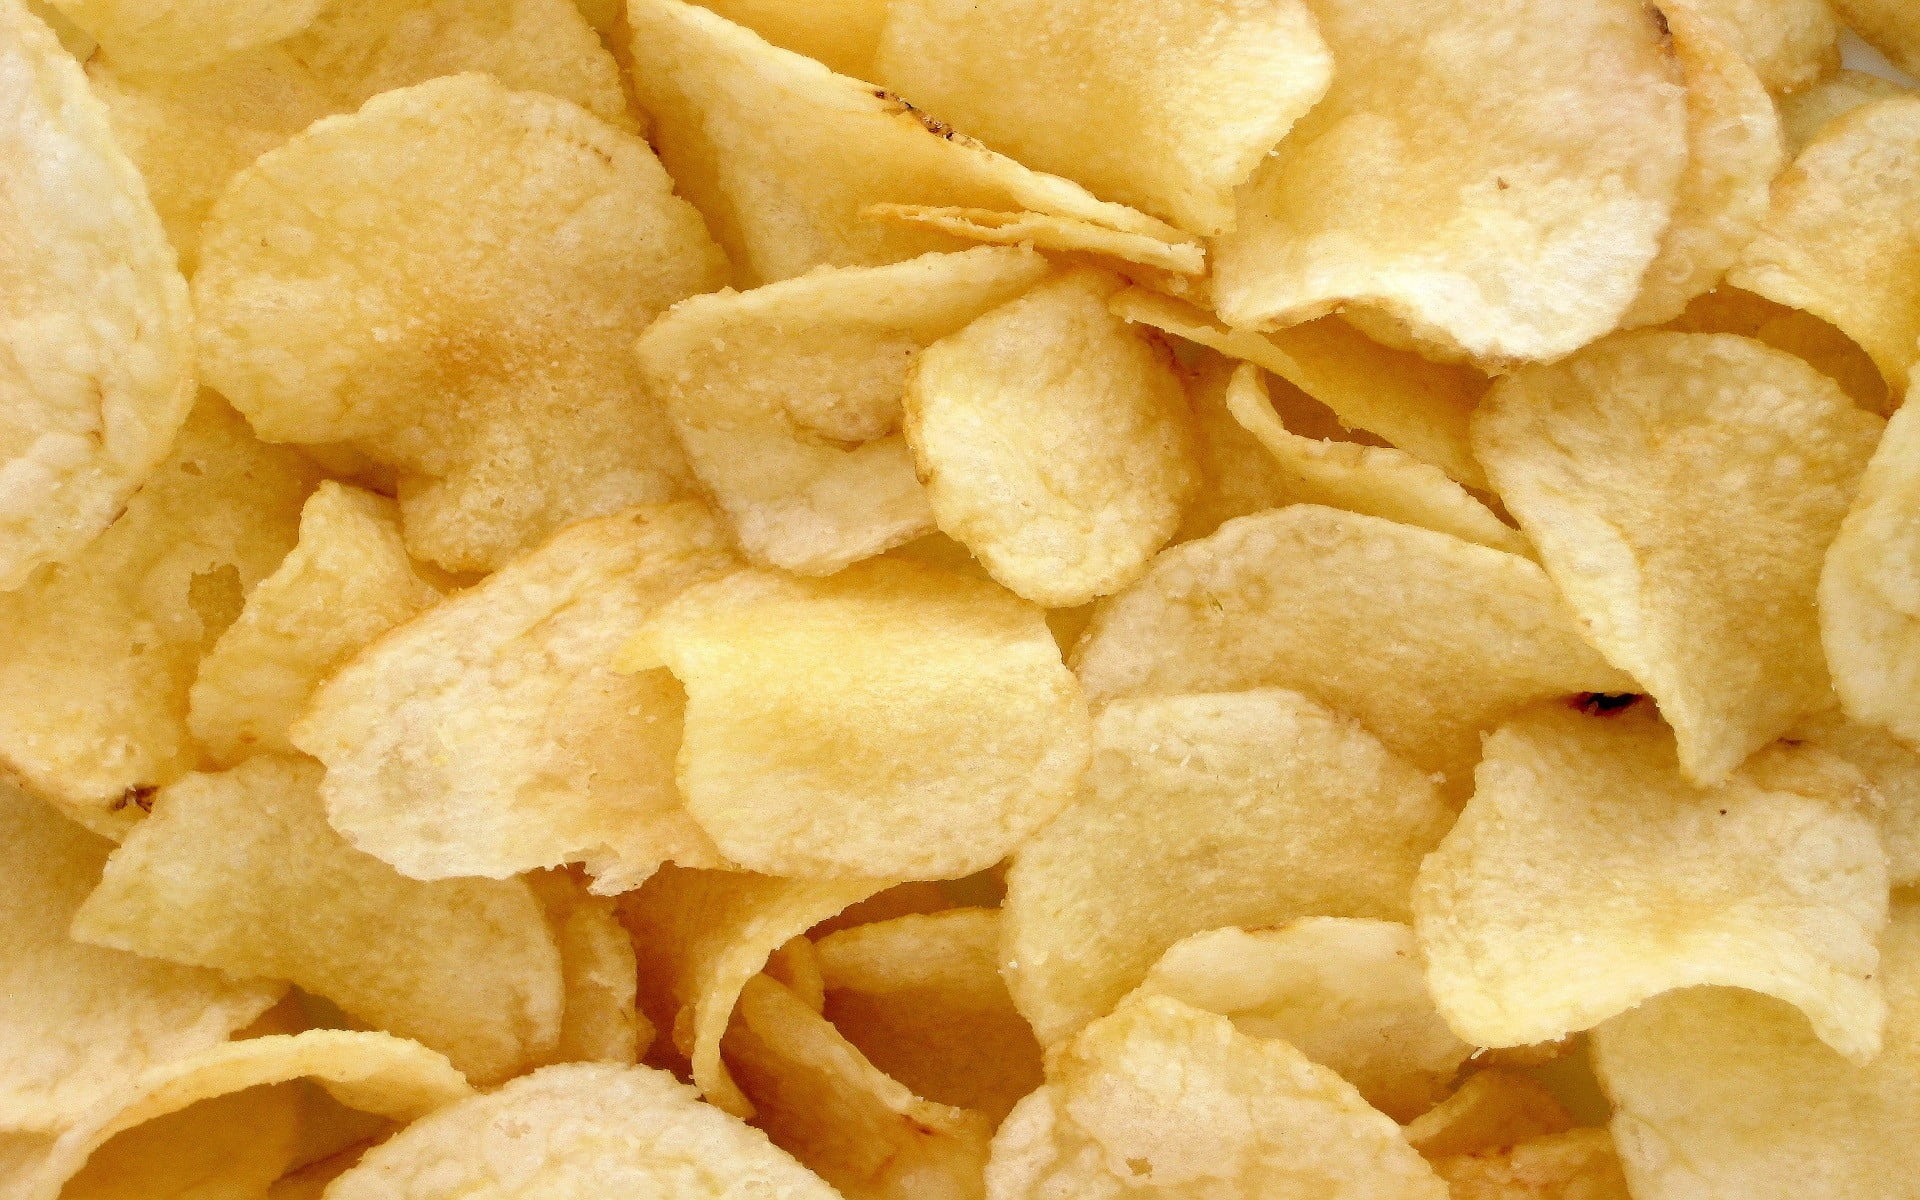 Crunchy potato chips, High-definition wallpaper, Snack time goodness, Crispy and irresistible, 1920x1200 HD Desktop